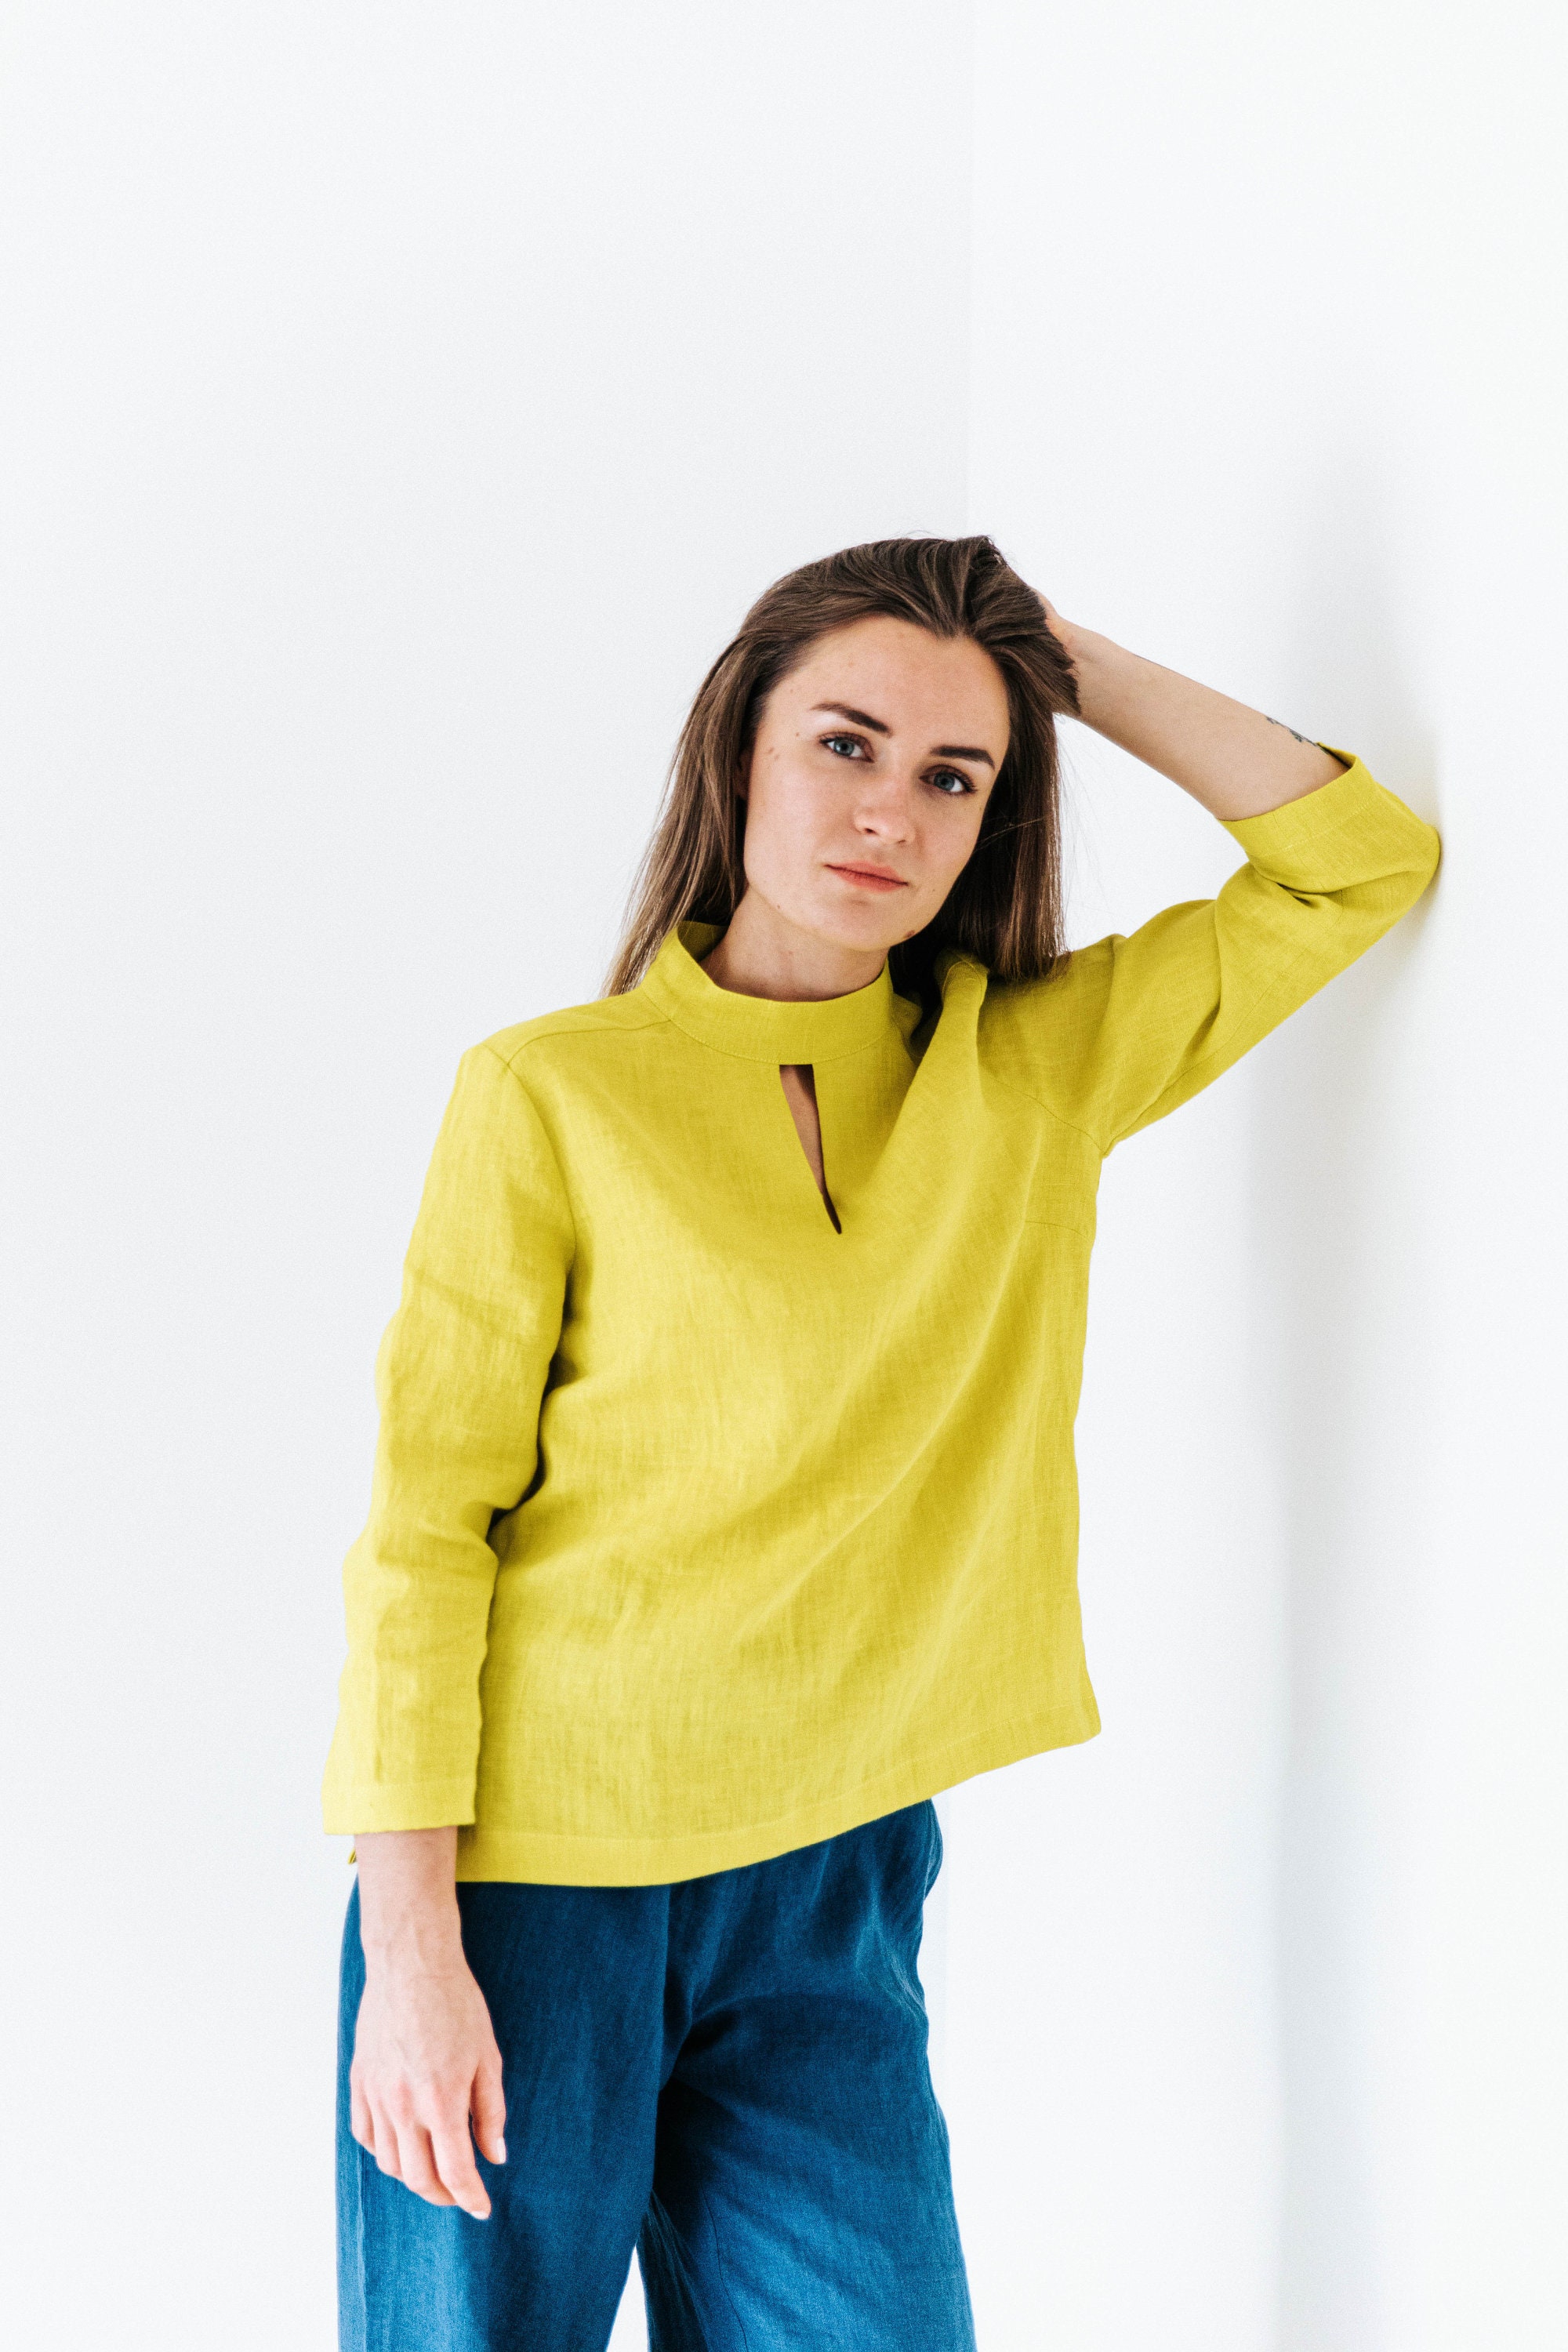 Linen blouse with decorated neckline. Yellow color shirt. Elegant top ...